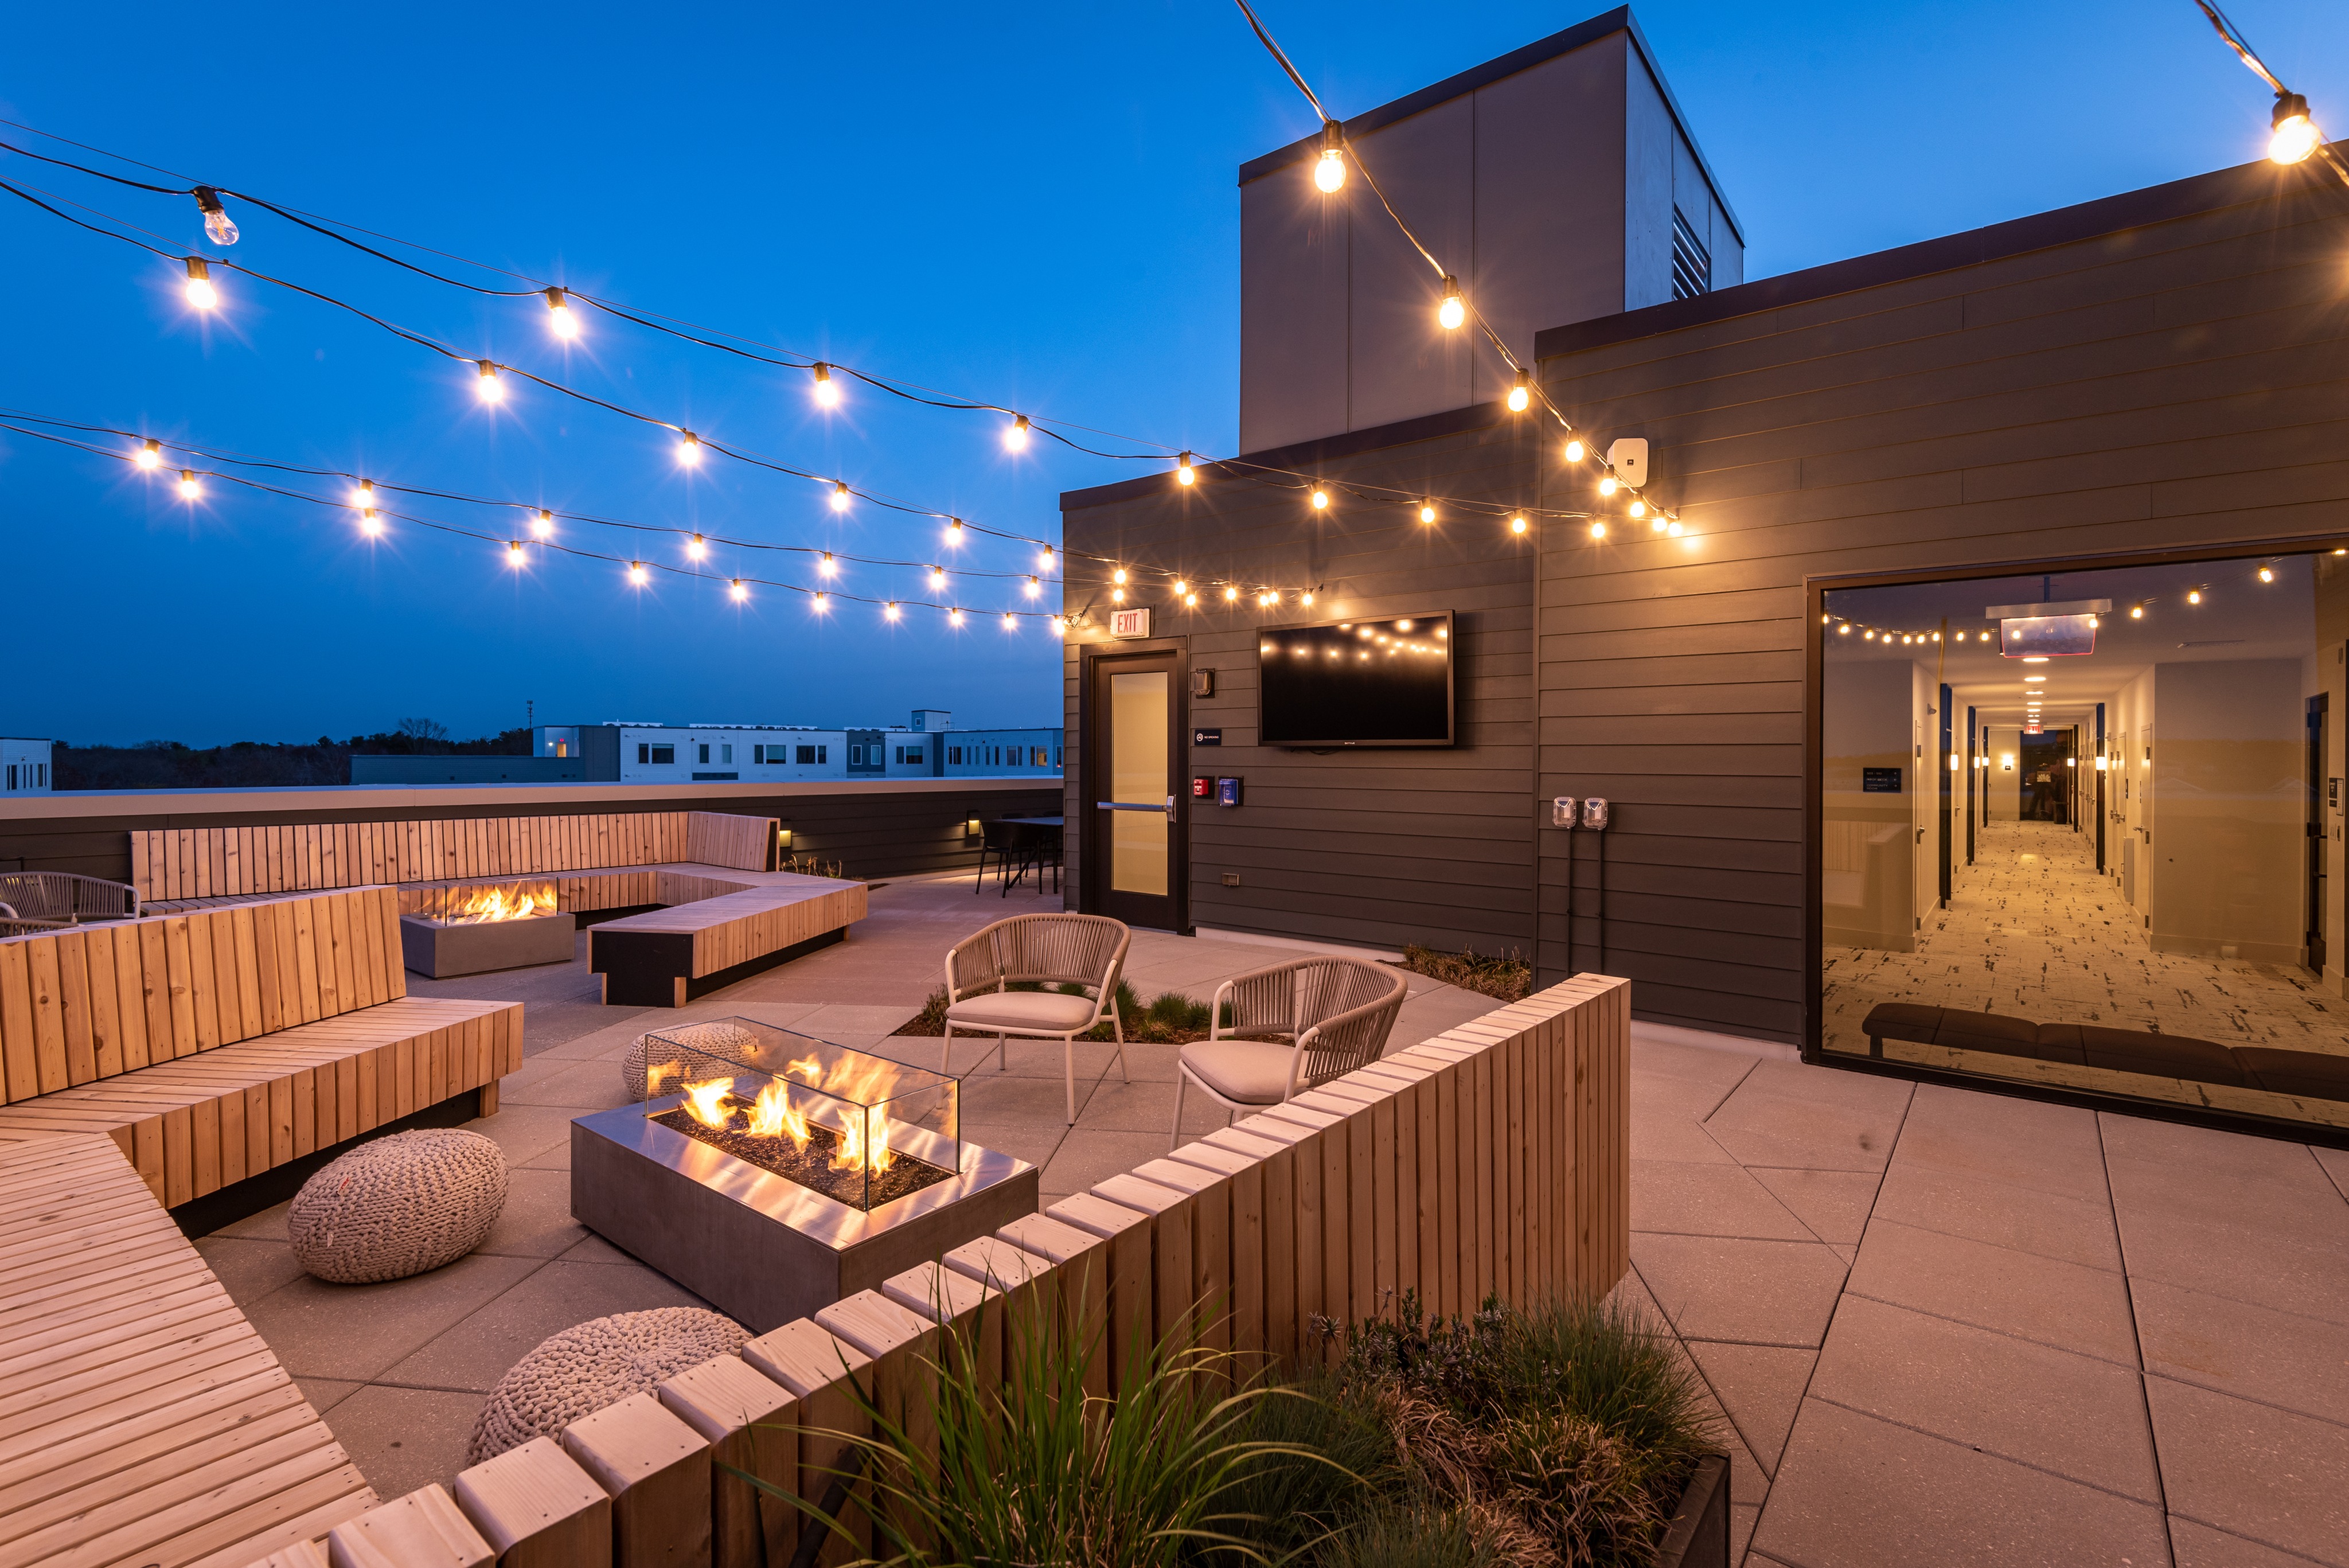 Adjoining roof deck with fire pit & lounge seating